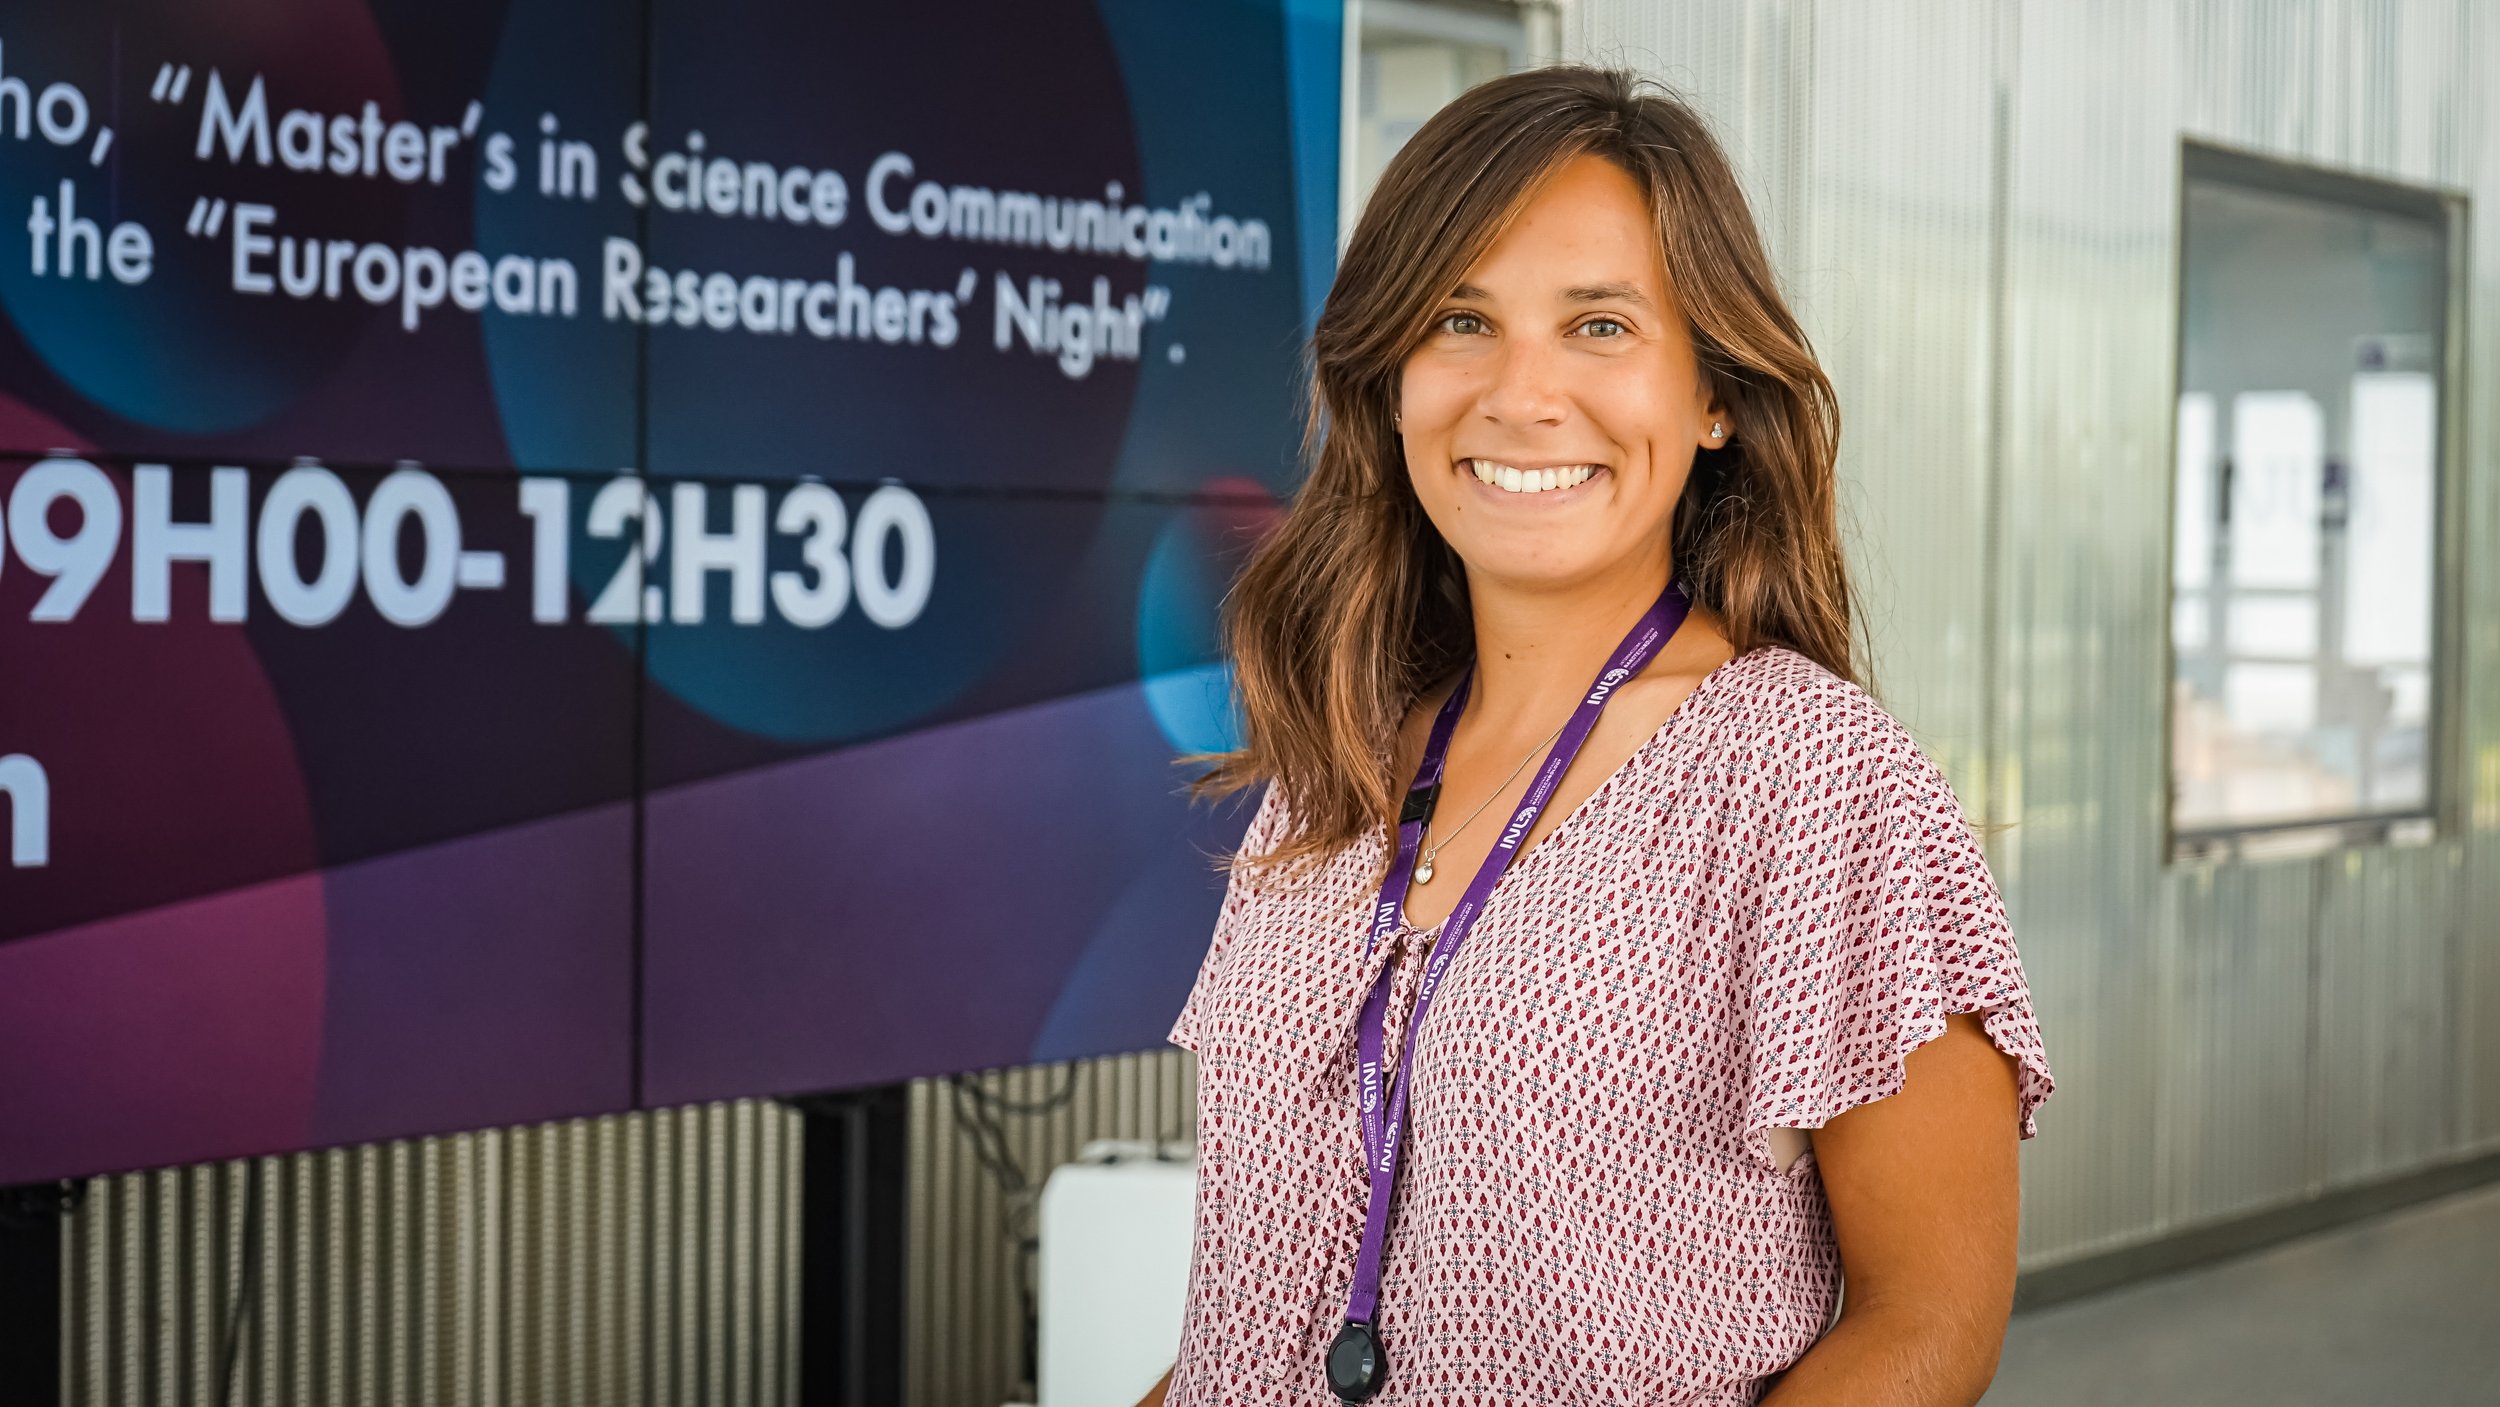 Catarina Moura, following a different path in science